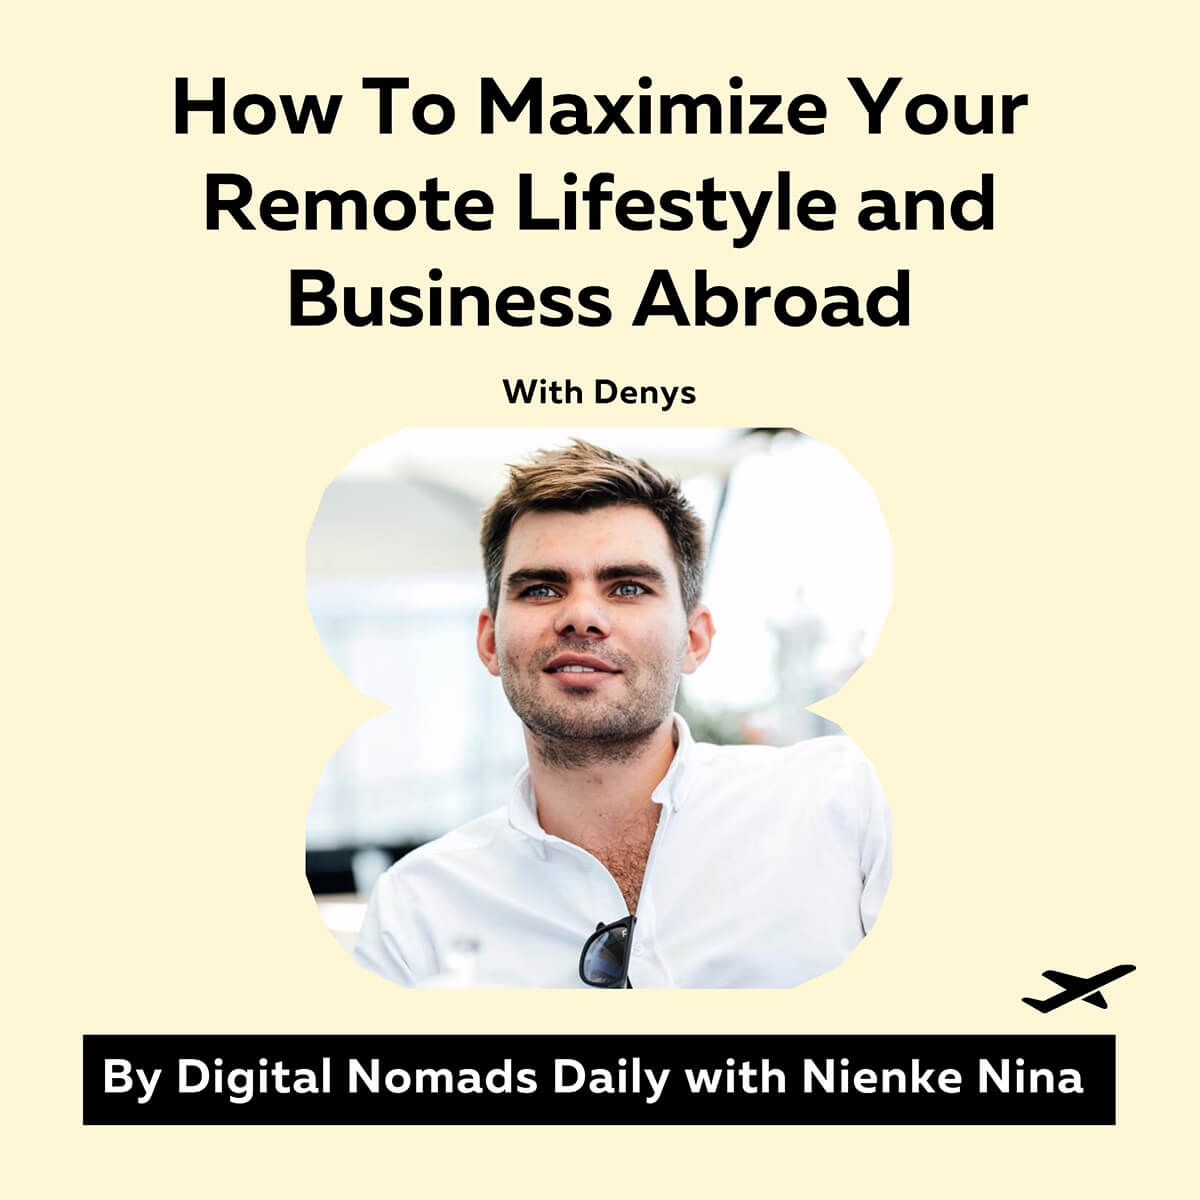 Digital Nomads Daily Podcast Cover How To Maximize Your Remote Lifestyle and Business Abroad with denys freedom business summit (1)